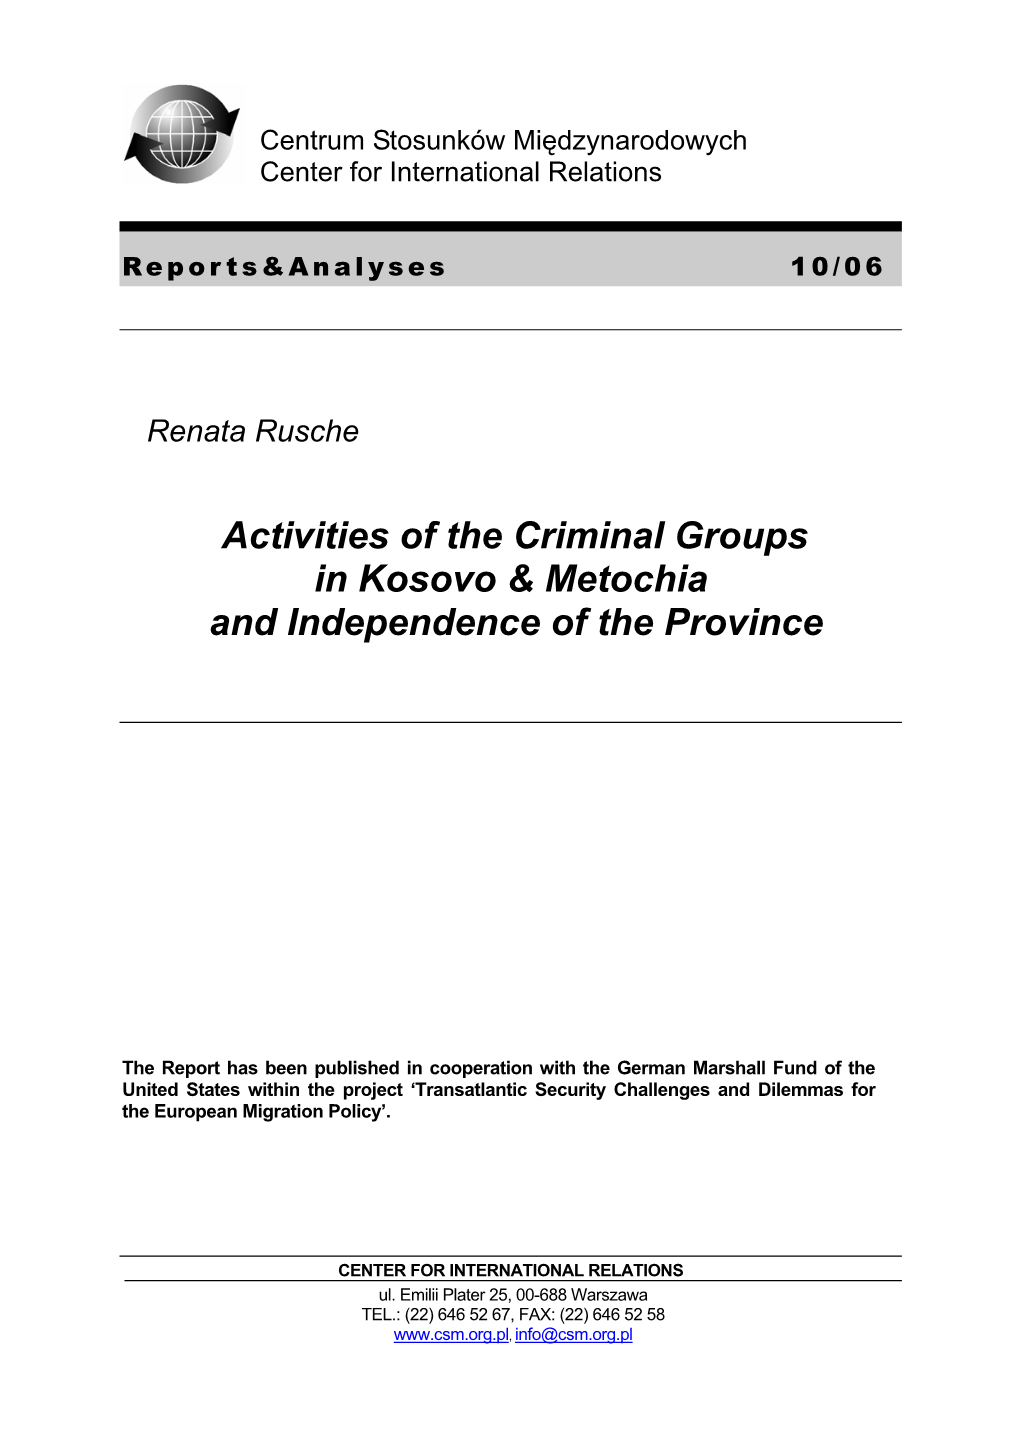 Activities of the Criminal Groups in Kosovo & Metochia And